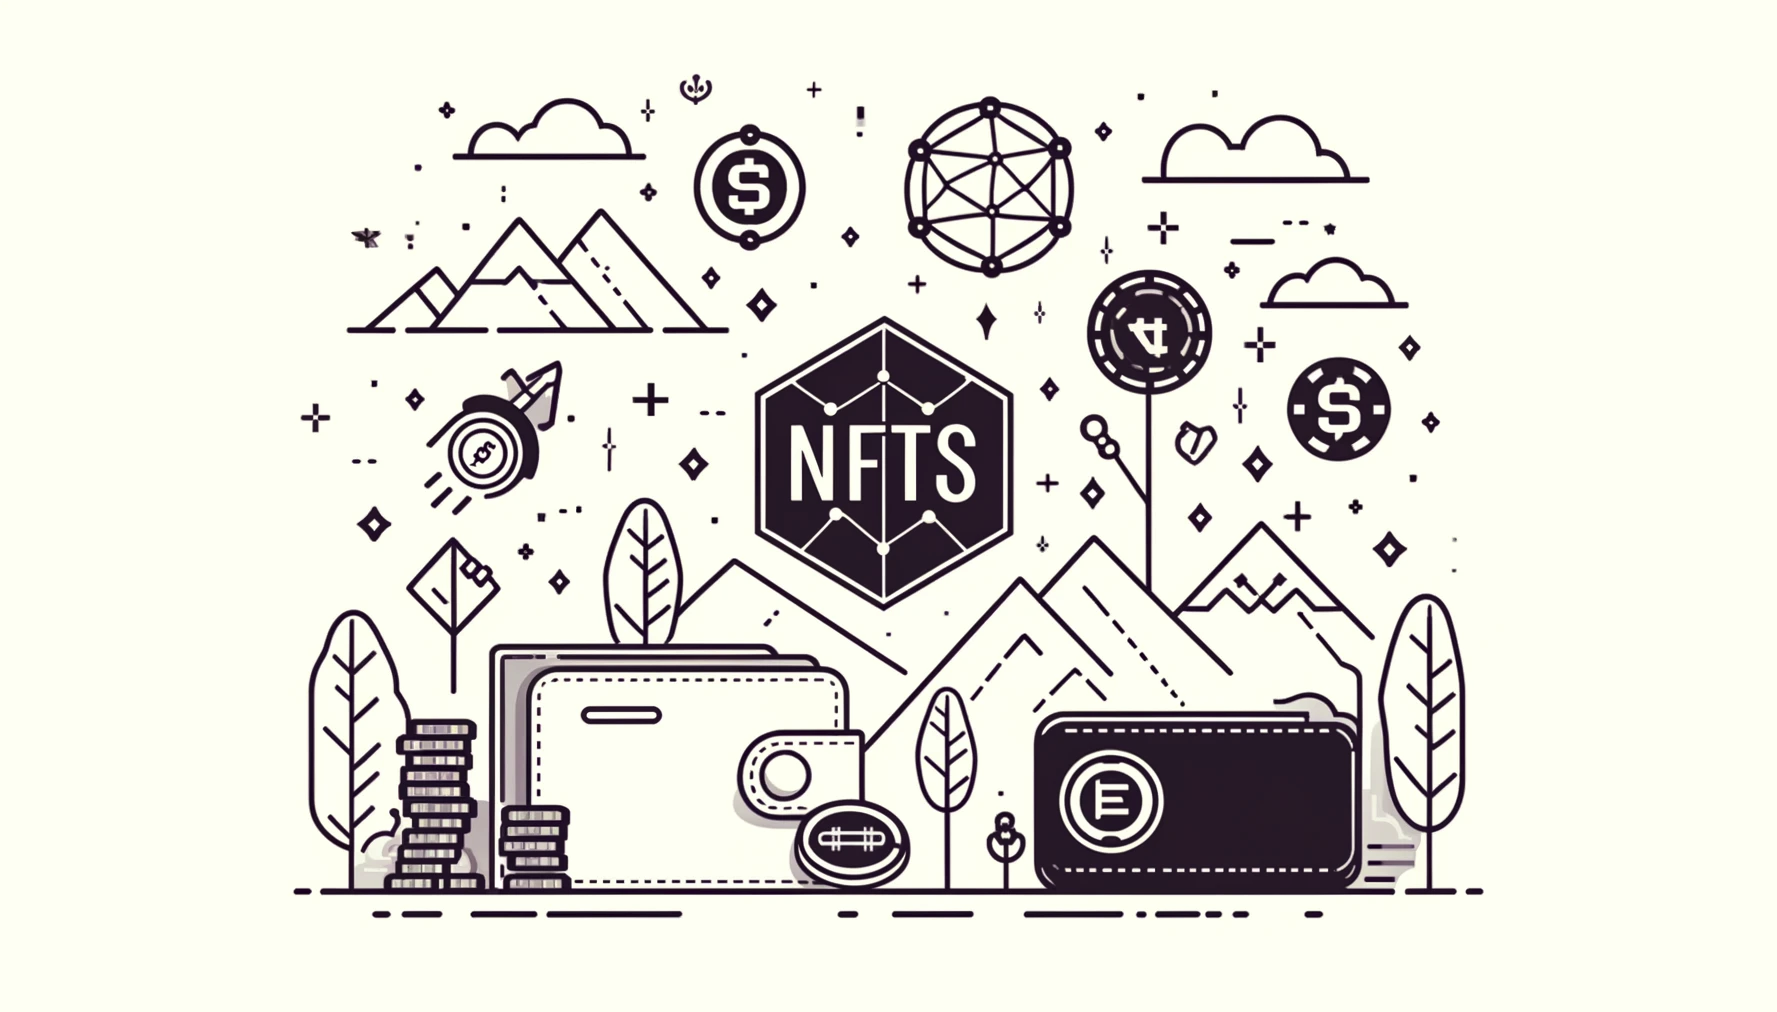 "NFTs" text surrounded by wallets and coins.